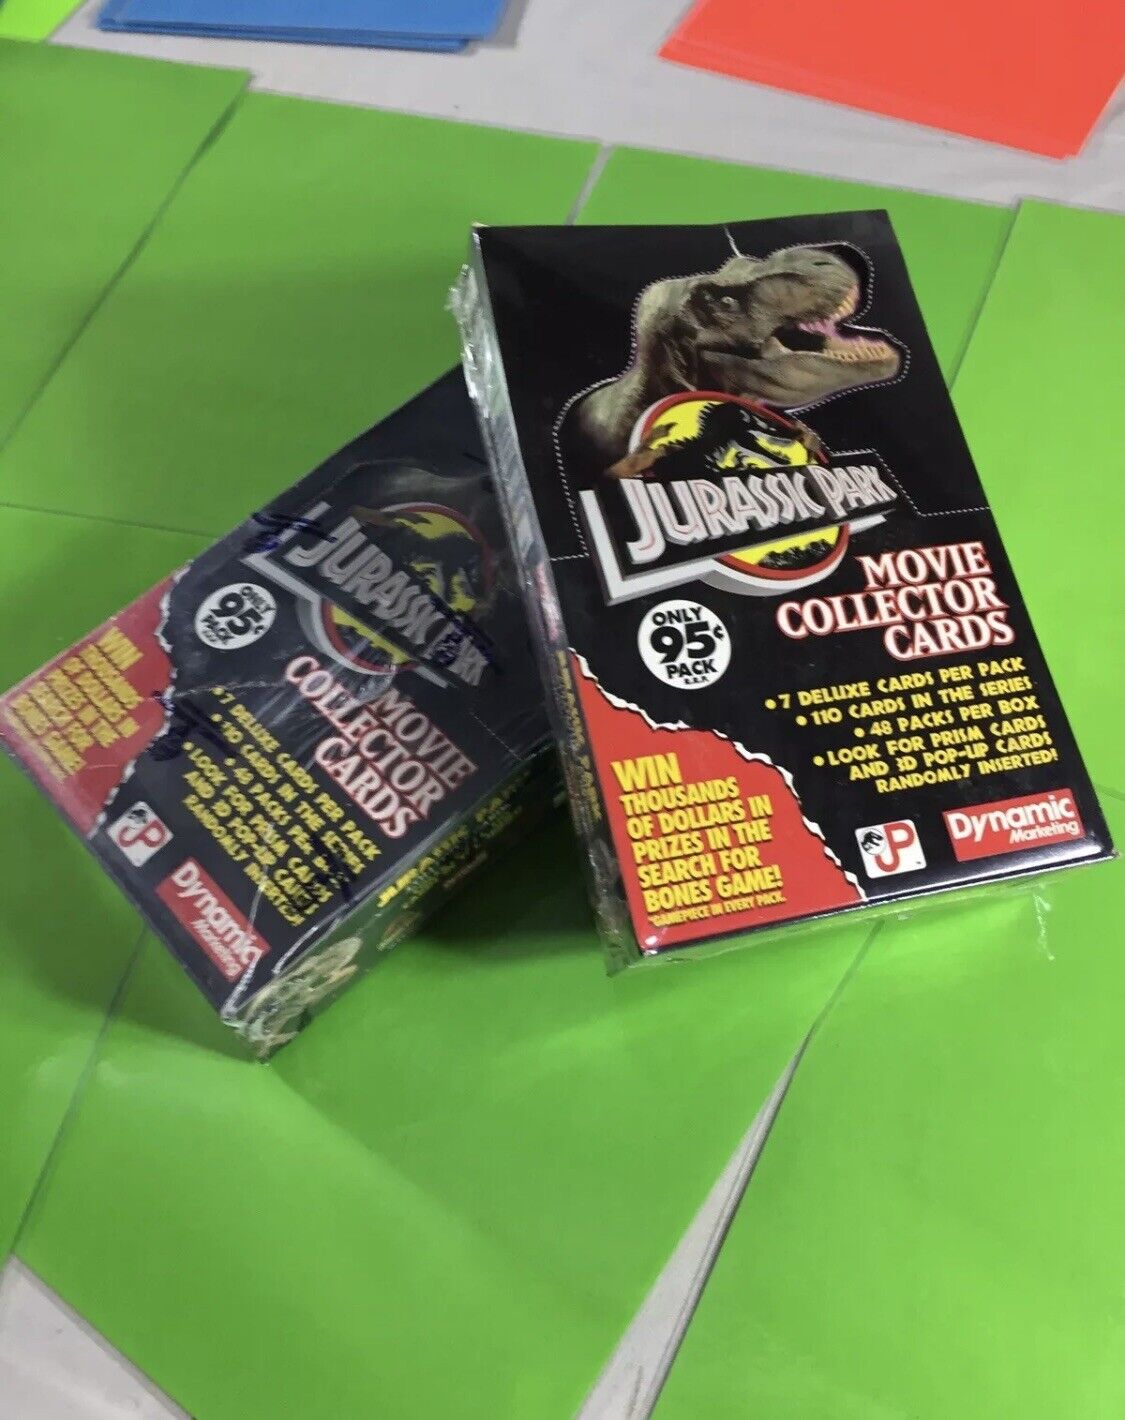 Vintage 1993 Jurassic Park Movie Collectors Cards. Box Sealed Very Rare